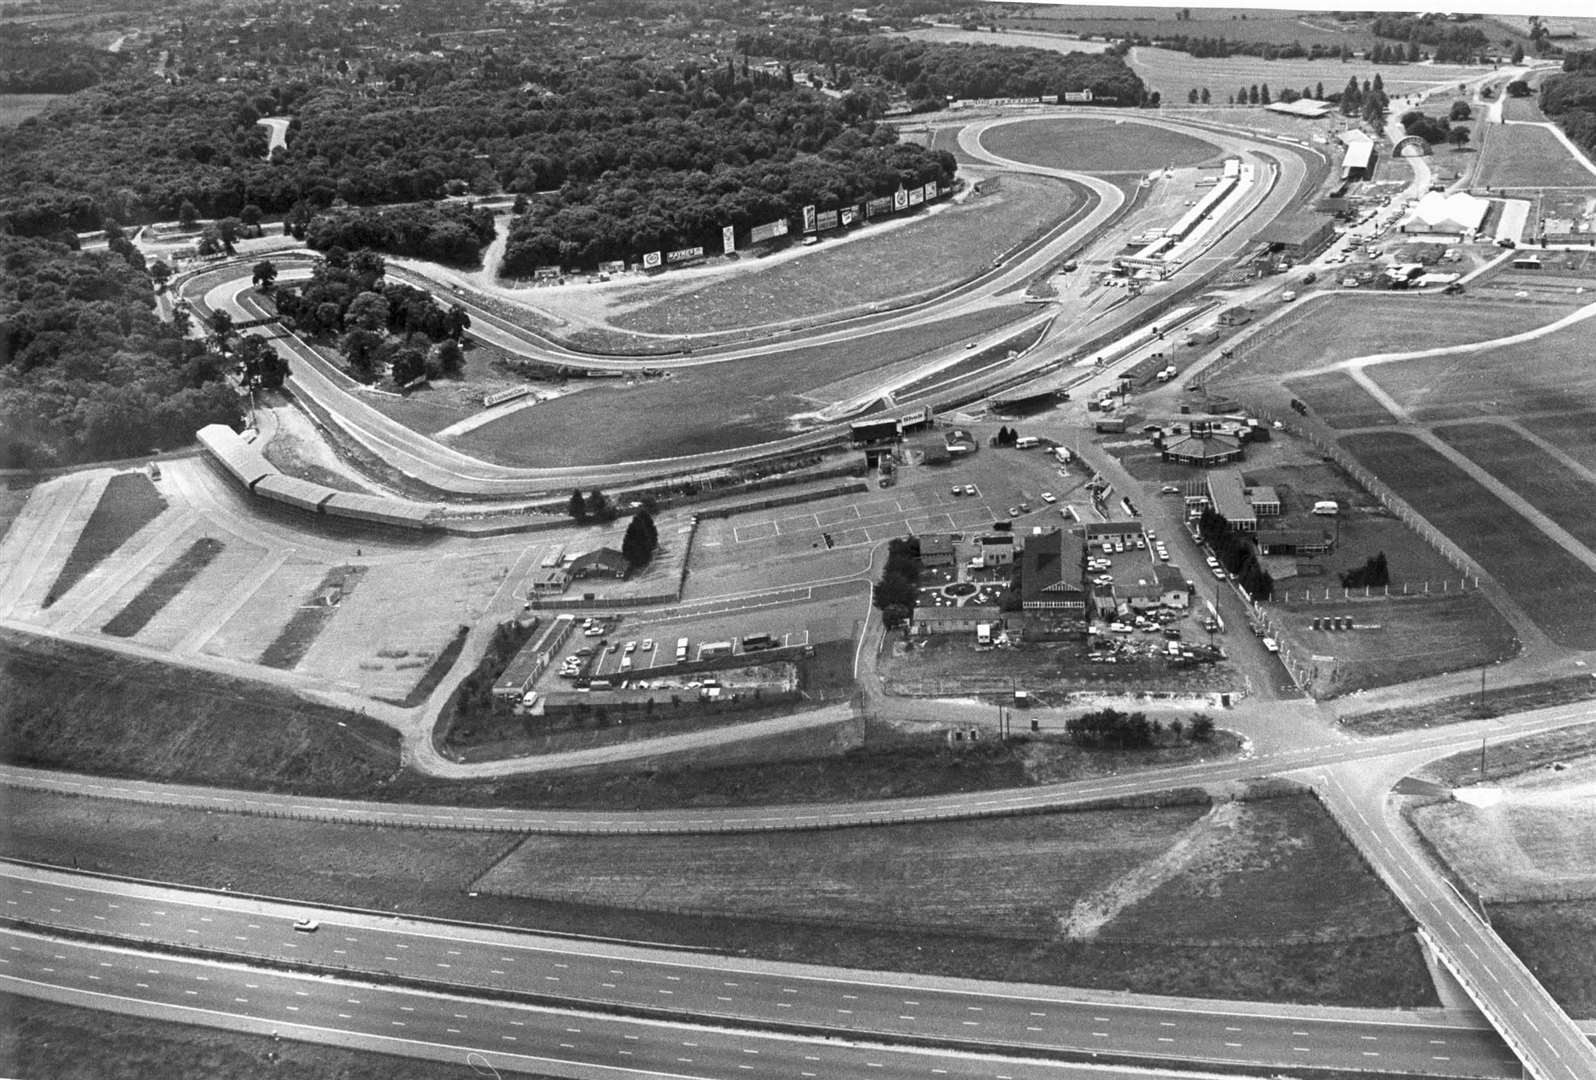 Just a single car can be seen on the M20 in this photo of the much-loved Brands Hatch race circuit in August 1978. Part of the demanding Grand Prix loop can be picked out amongst the trees in the top left of the shot